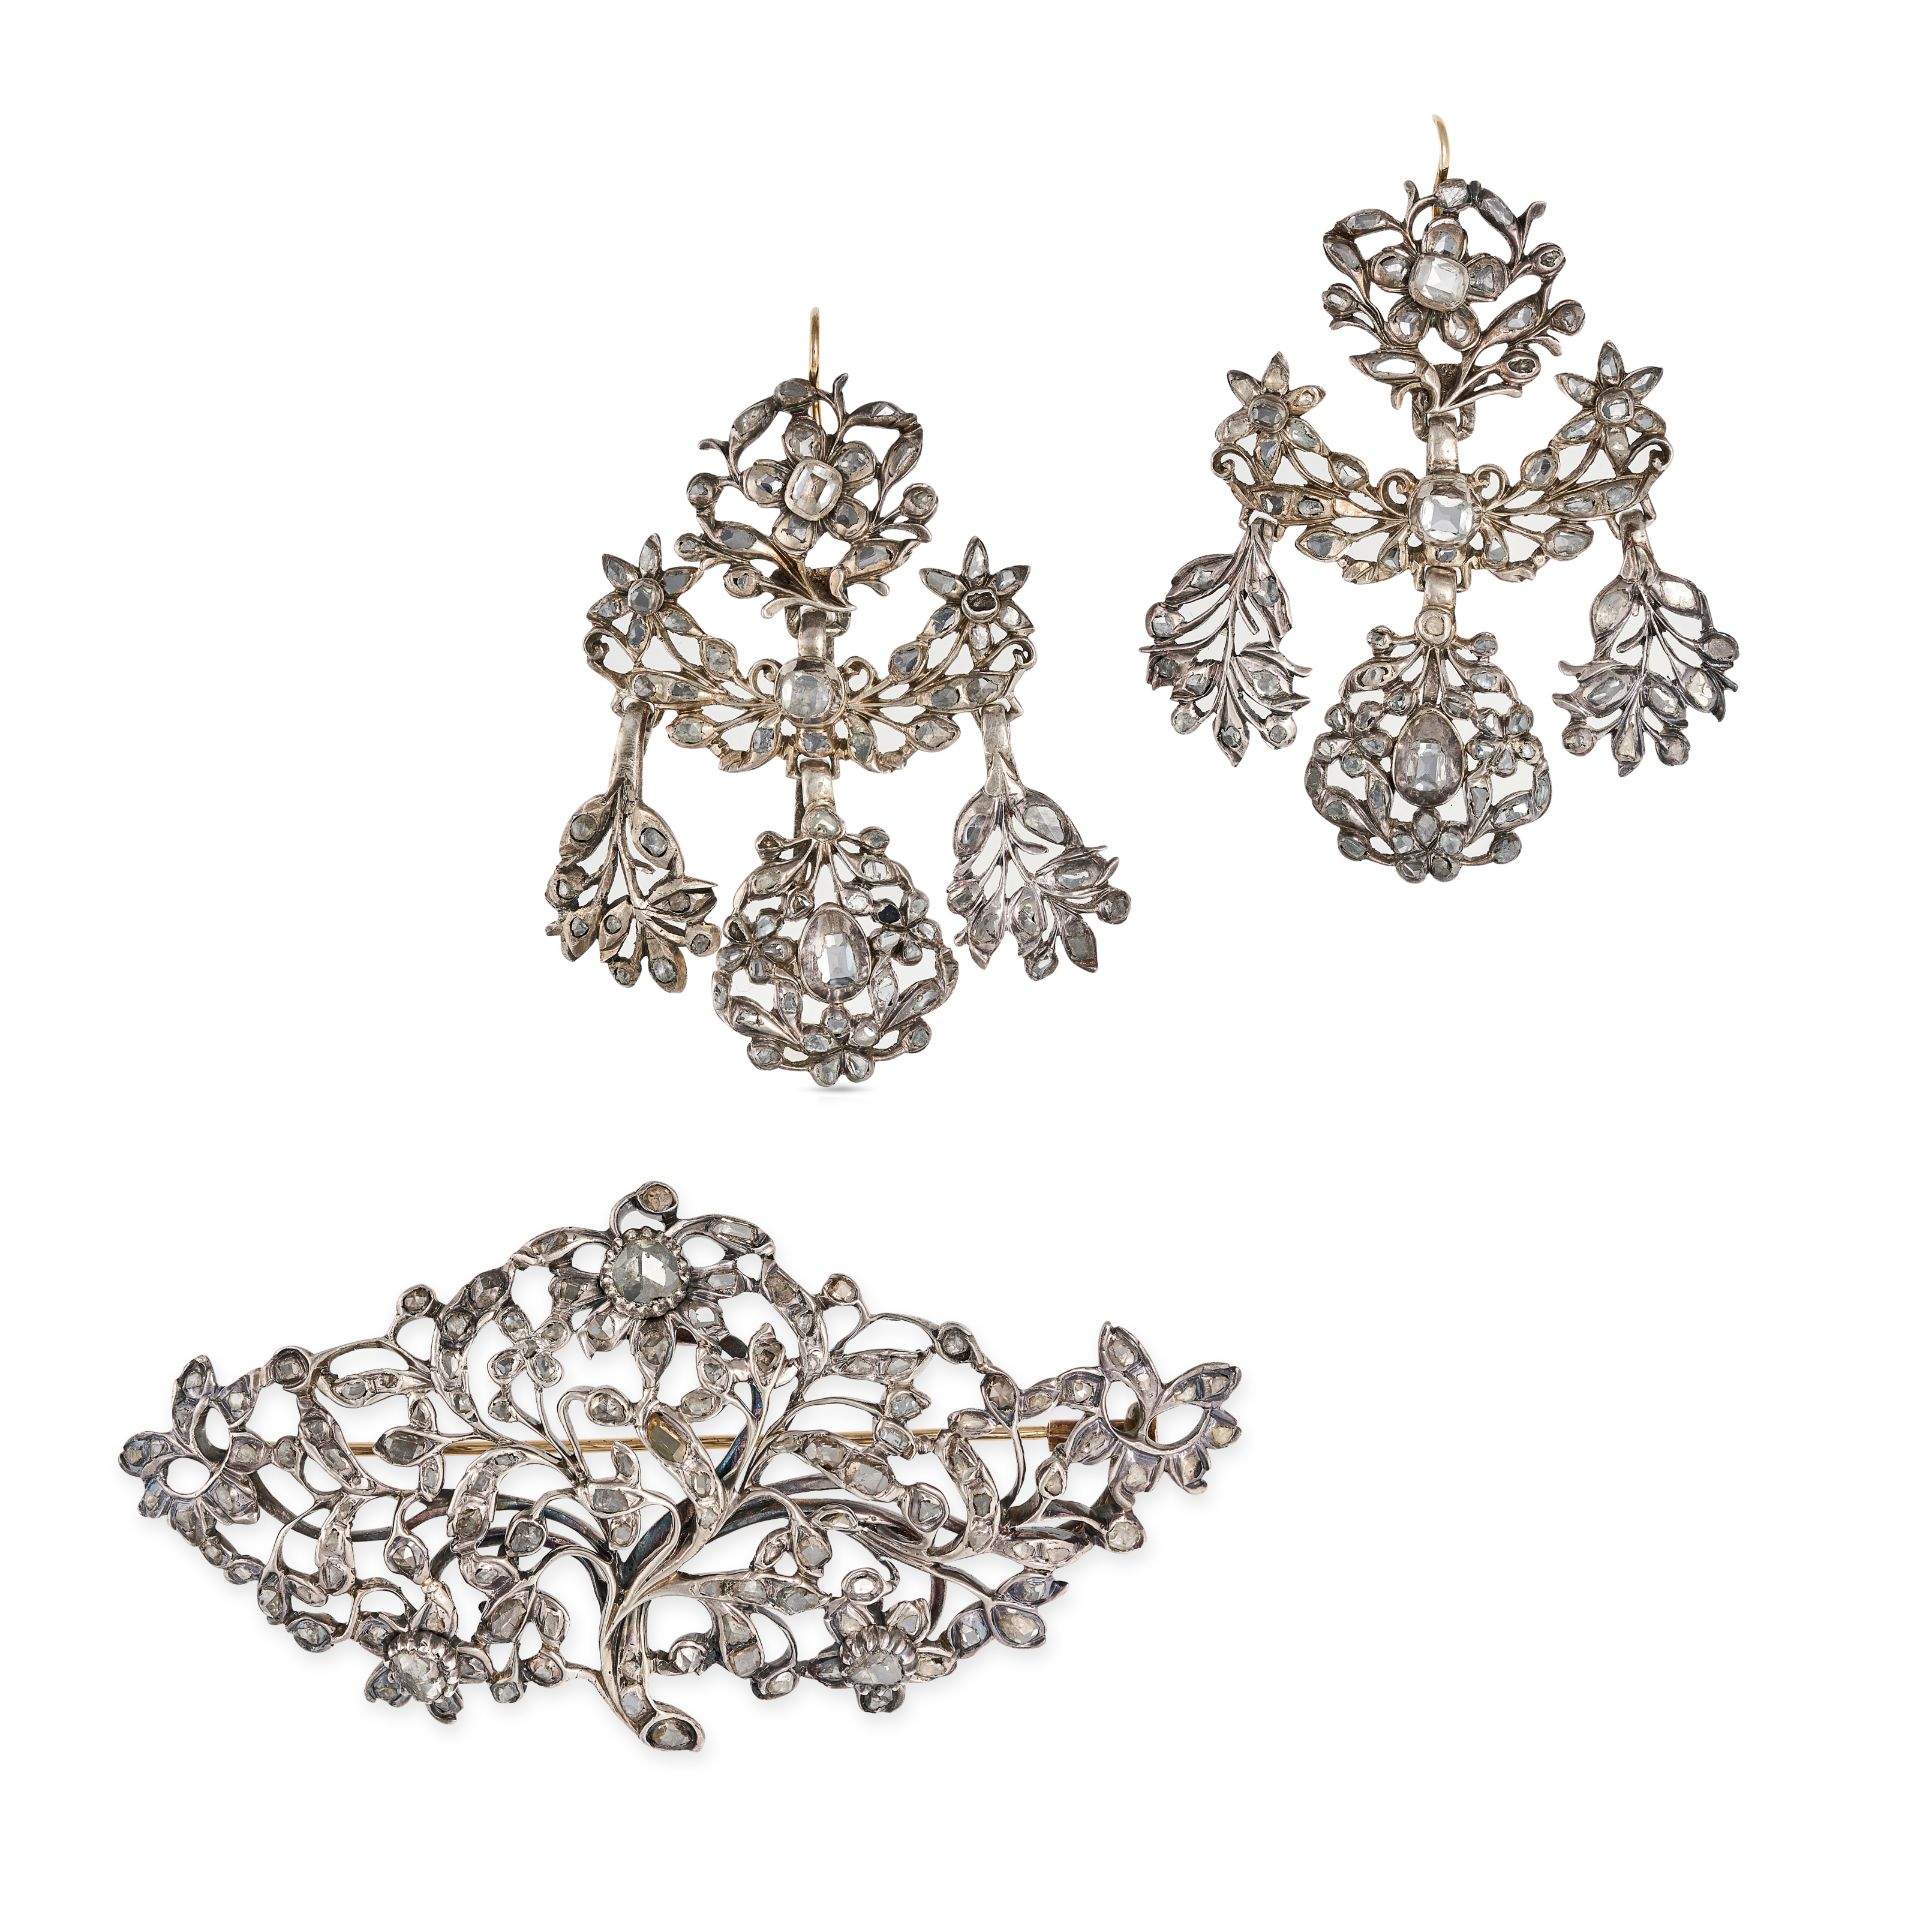 A FINE ANTIQUE DIAMOND BROOCH AND EARRINGS SUITE, 18TH CENTURY in silver, the brooch in foliate d...